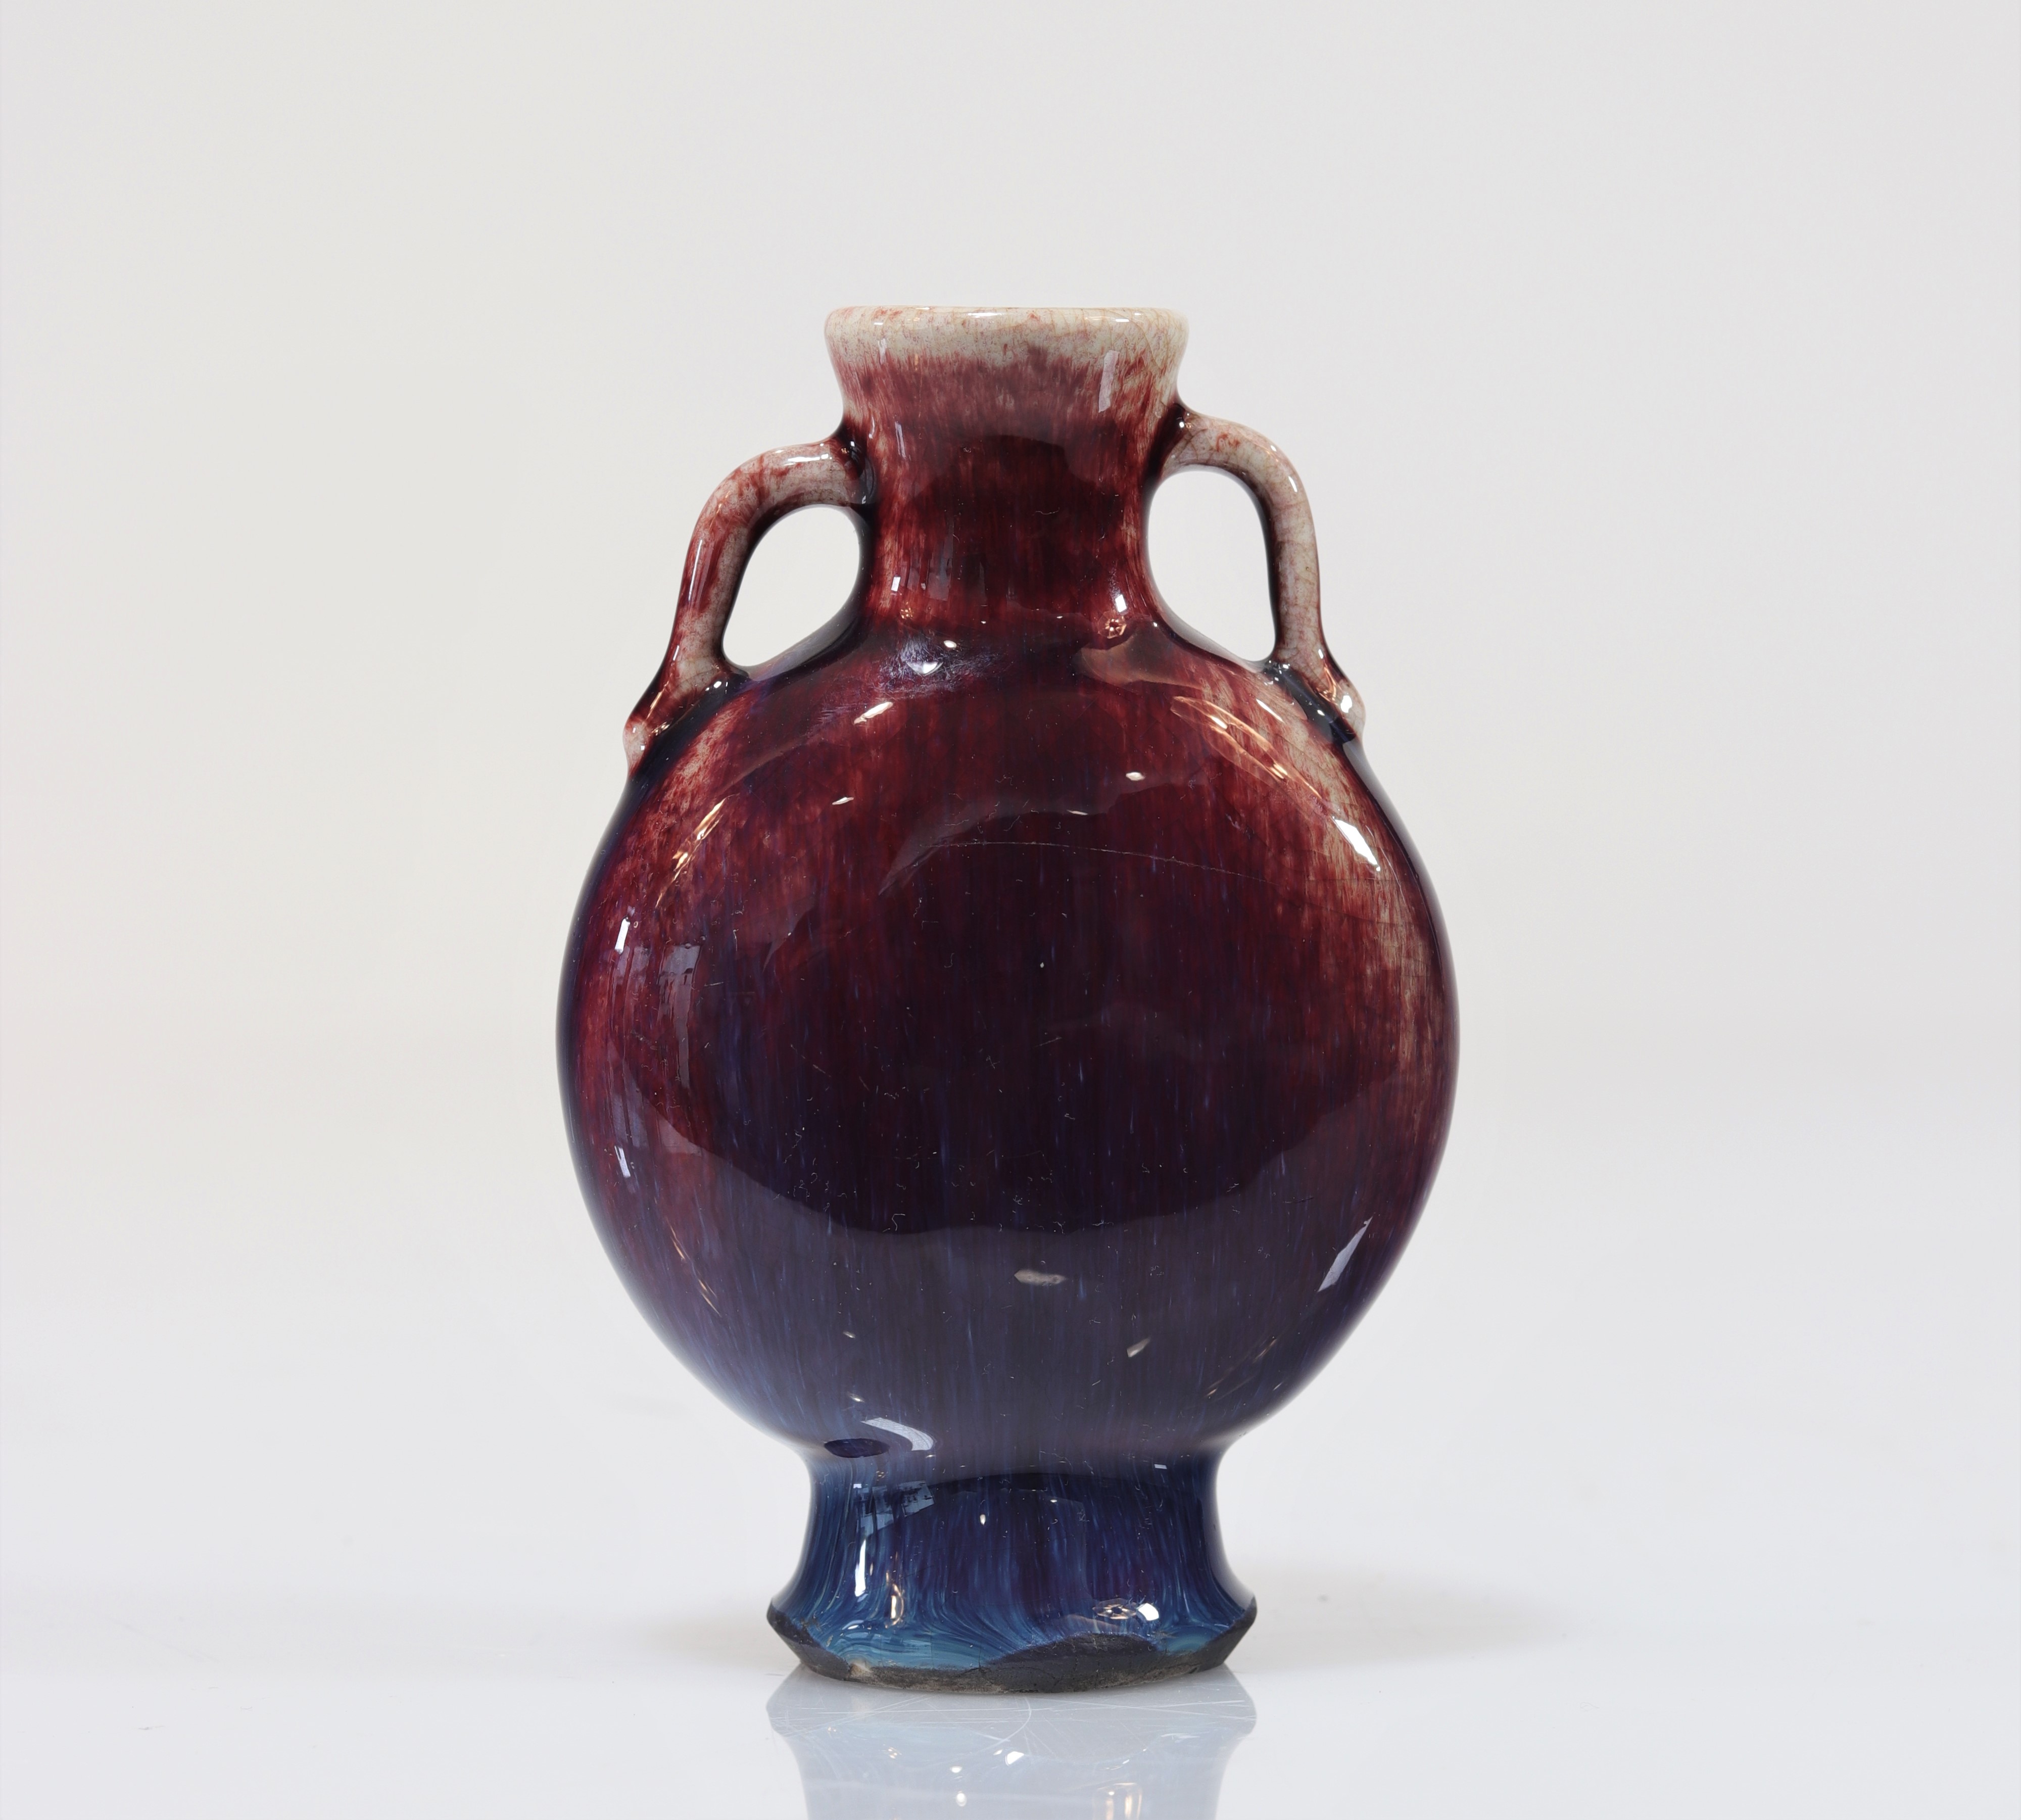 Qing period flamed oxblood gourd vase